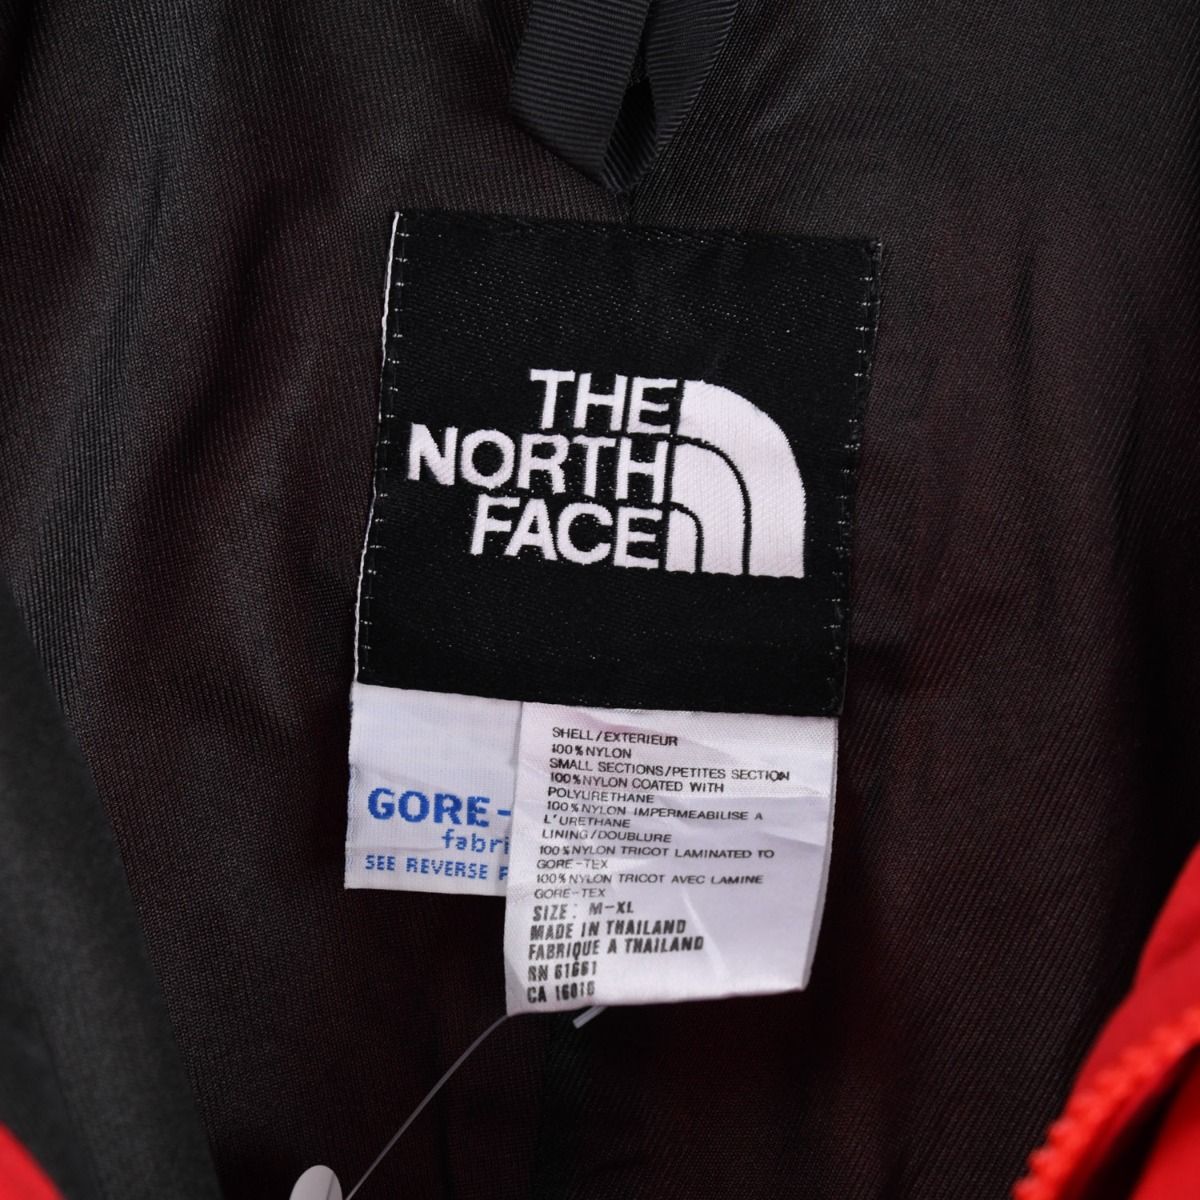 The North Face 'Vertical' 1980s Jacket